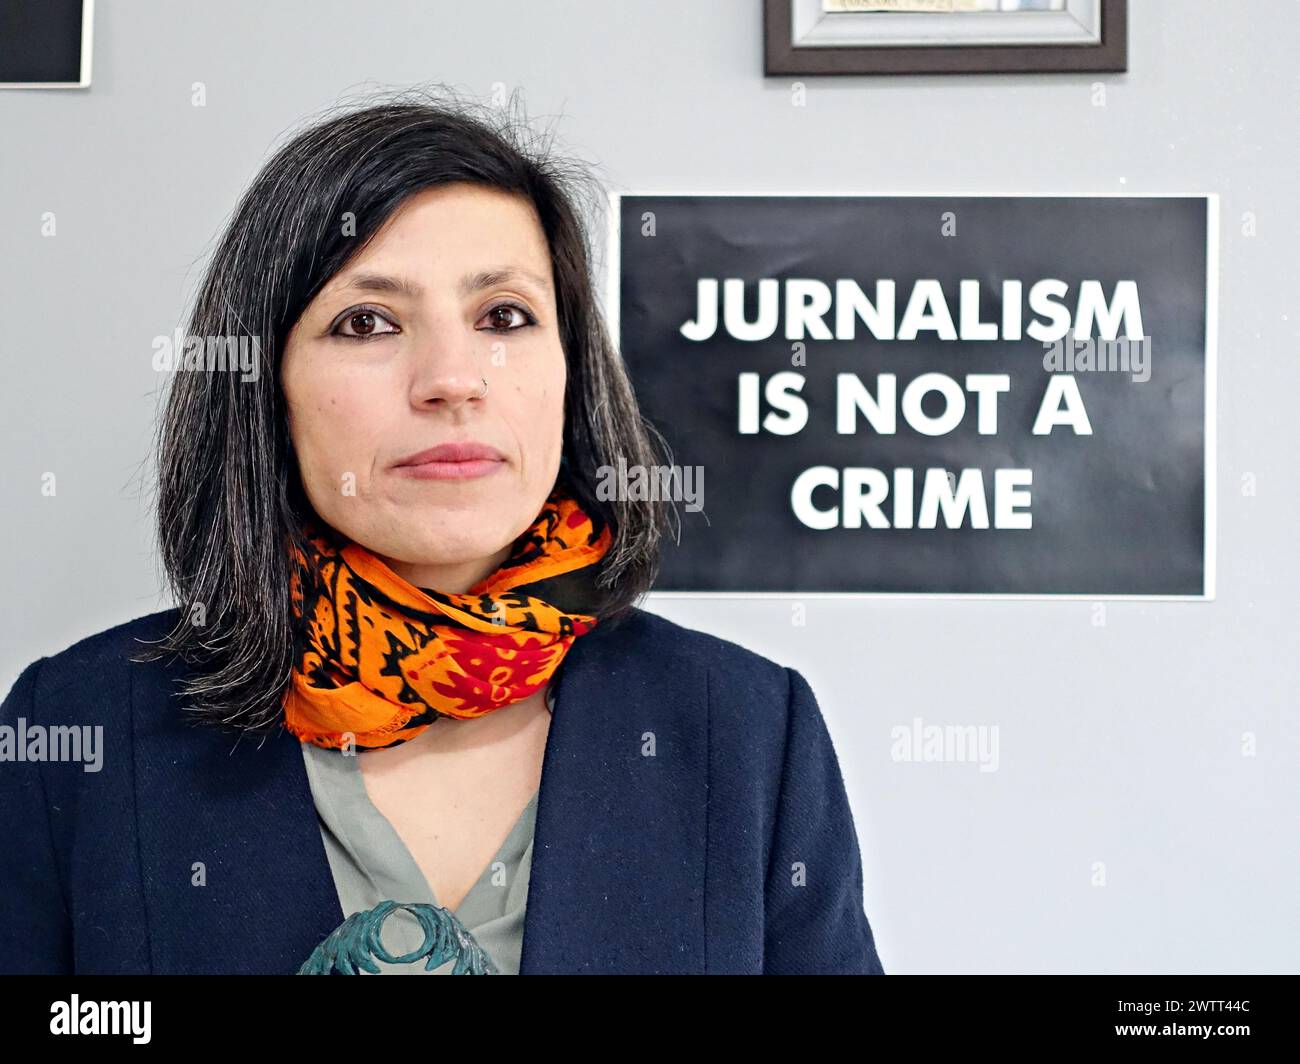 Dicle Muftuoglu, Co-Chairman of the Dicle Firat Journalists Association in Diyarbakir, is seen in front of the inscription 'Journalism is not a crime'. Dicle Muftuoglu who won the Free Press Unlimited's “Most Resilient Journalist Award” in the Netherlands in November last year, but could not receive the award because she was in prison, received her award when she was released. Journalist Muftuoglu, who was held in prison for 10 months on the grounds that she was a member of the armed Kurdish organization Kurdistan Workers' Party (PKK), was released last week. The majority of the members of th Stock Photo